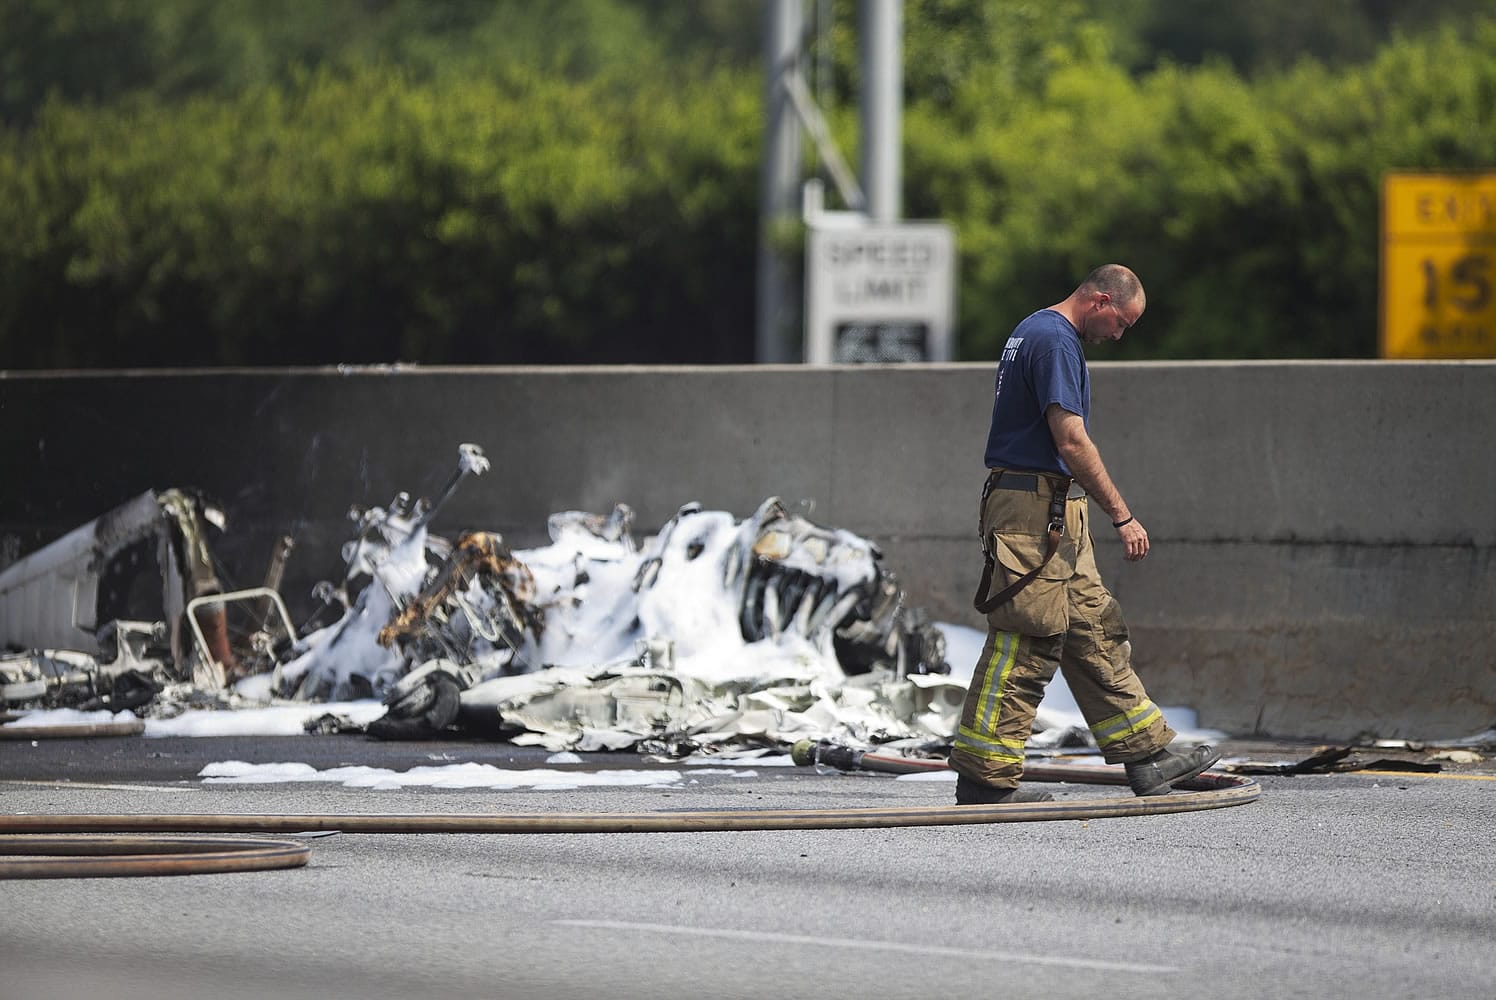 A firefighter walks past the wreckage of a plane crash Friday on Interstate 285 in Doraville, Ga. Spokesman Capt. Eric Jackson of the DeKalb County Fire Department told reporters that four were onboard, and all died. He says the east-west highway is shut down in both directions. He says he doesn't know any details about where the plane was headed.